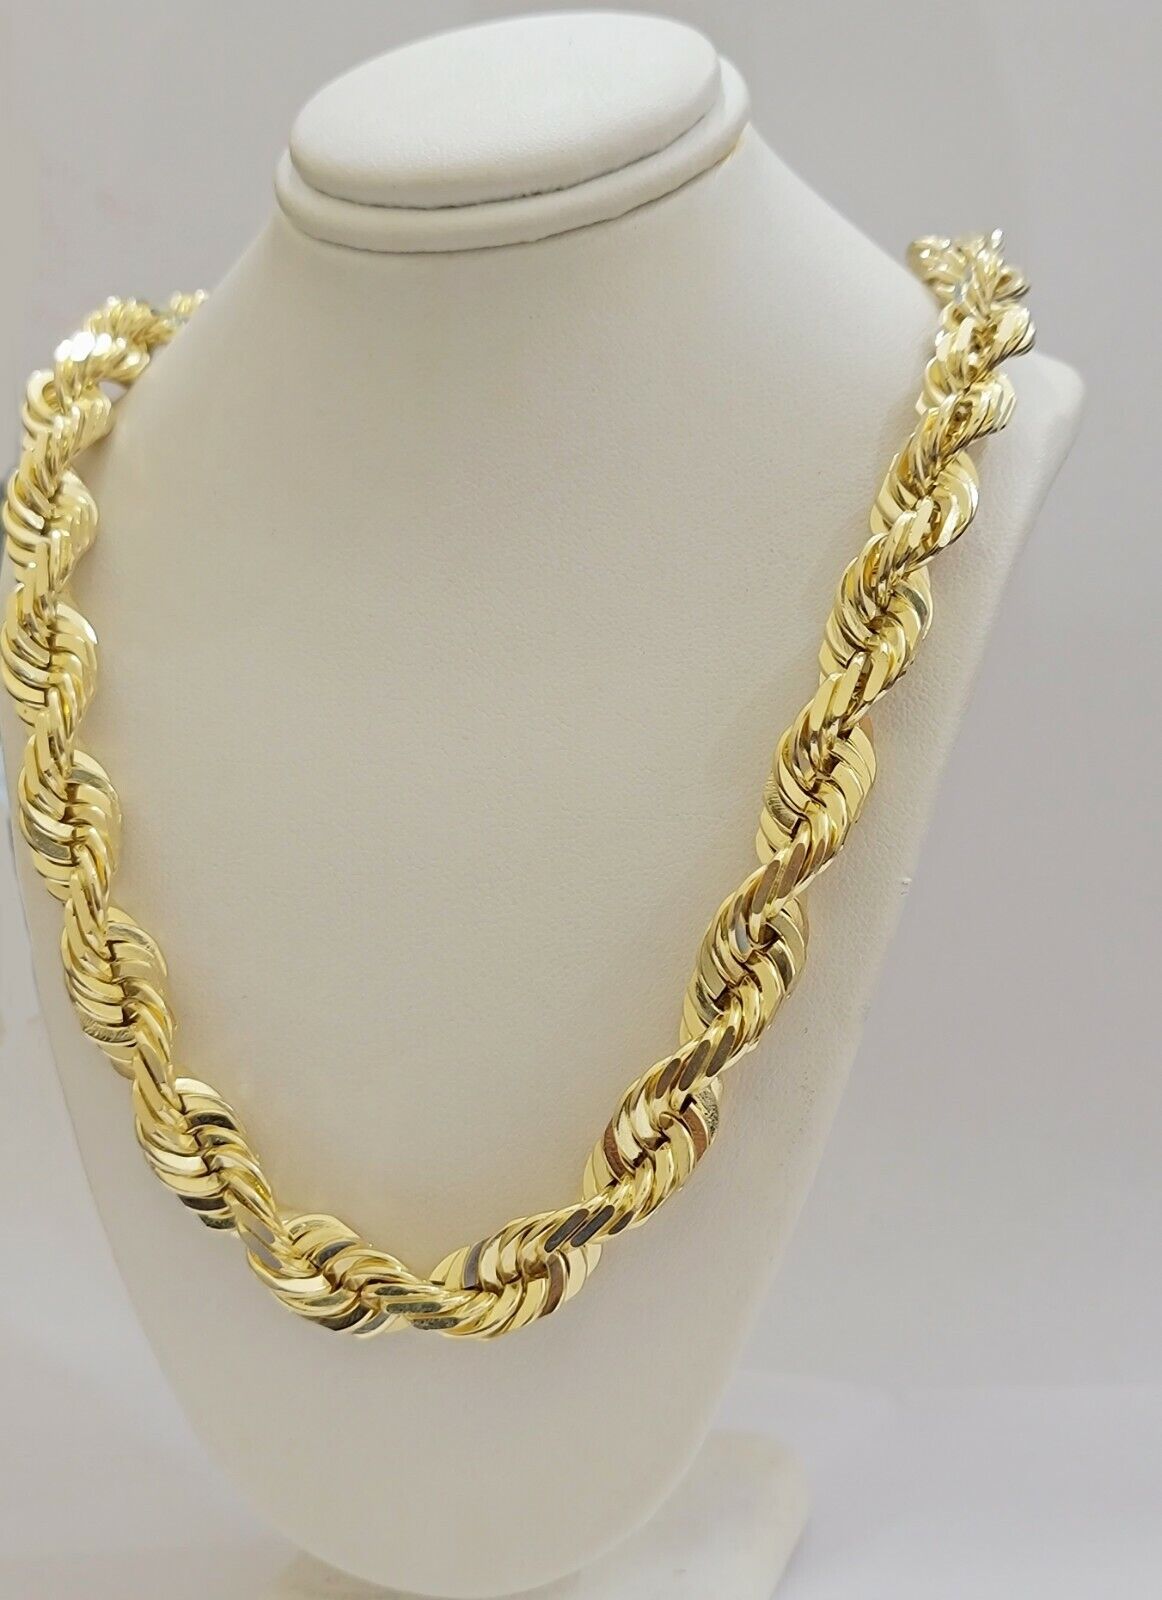 10mm Rope Chain Necklace 10k Yellow Gold 22" Choker Diamond Cut Men's REAL 10kt